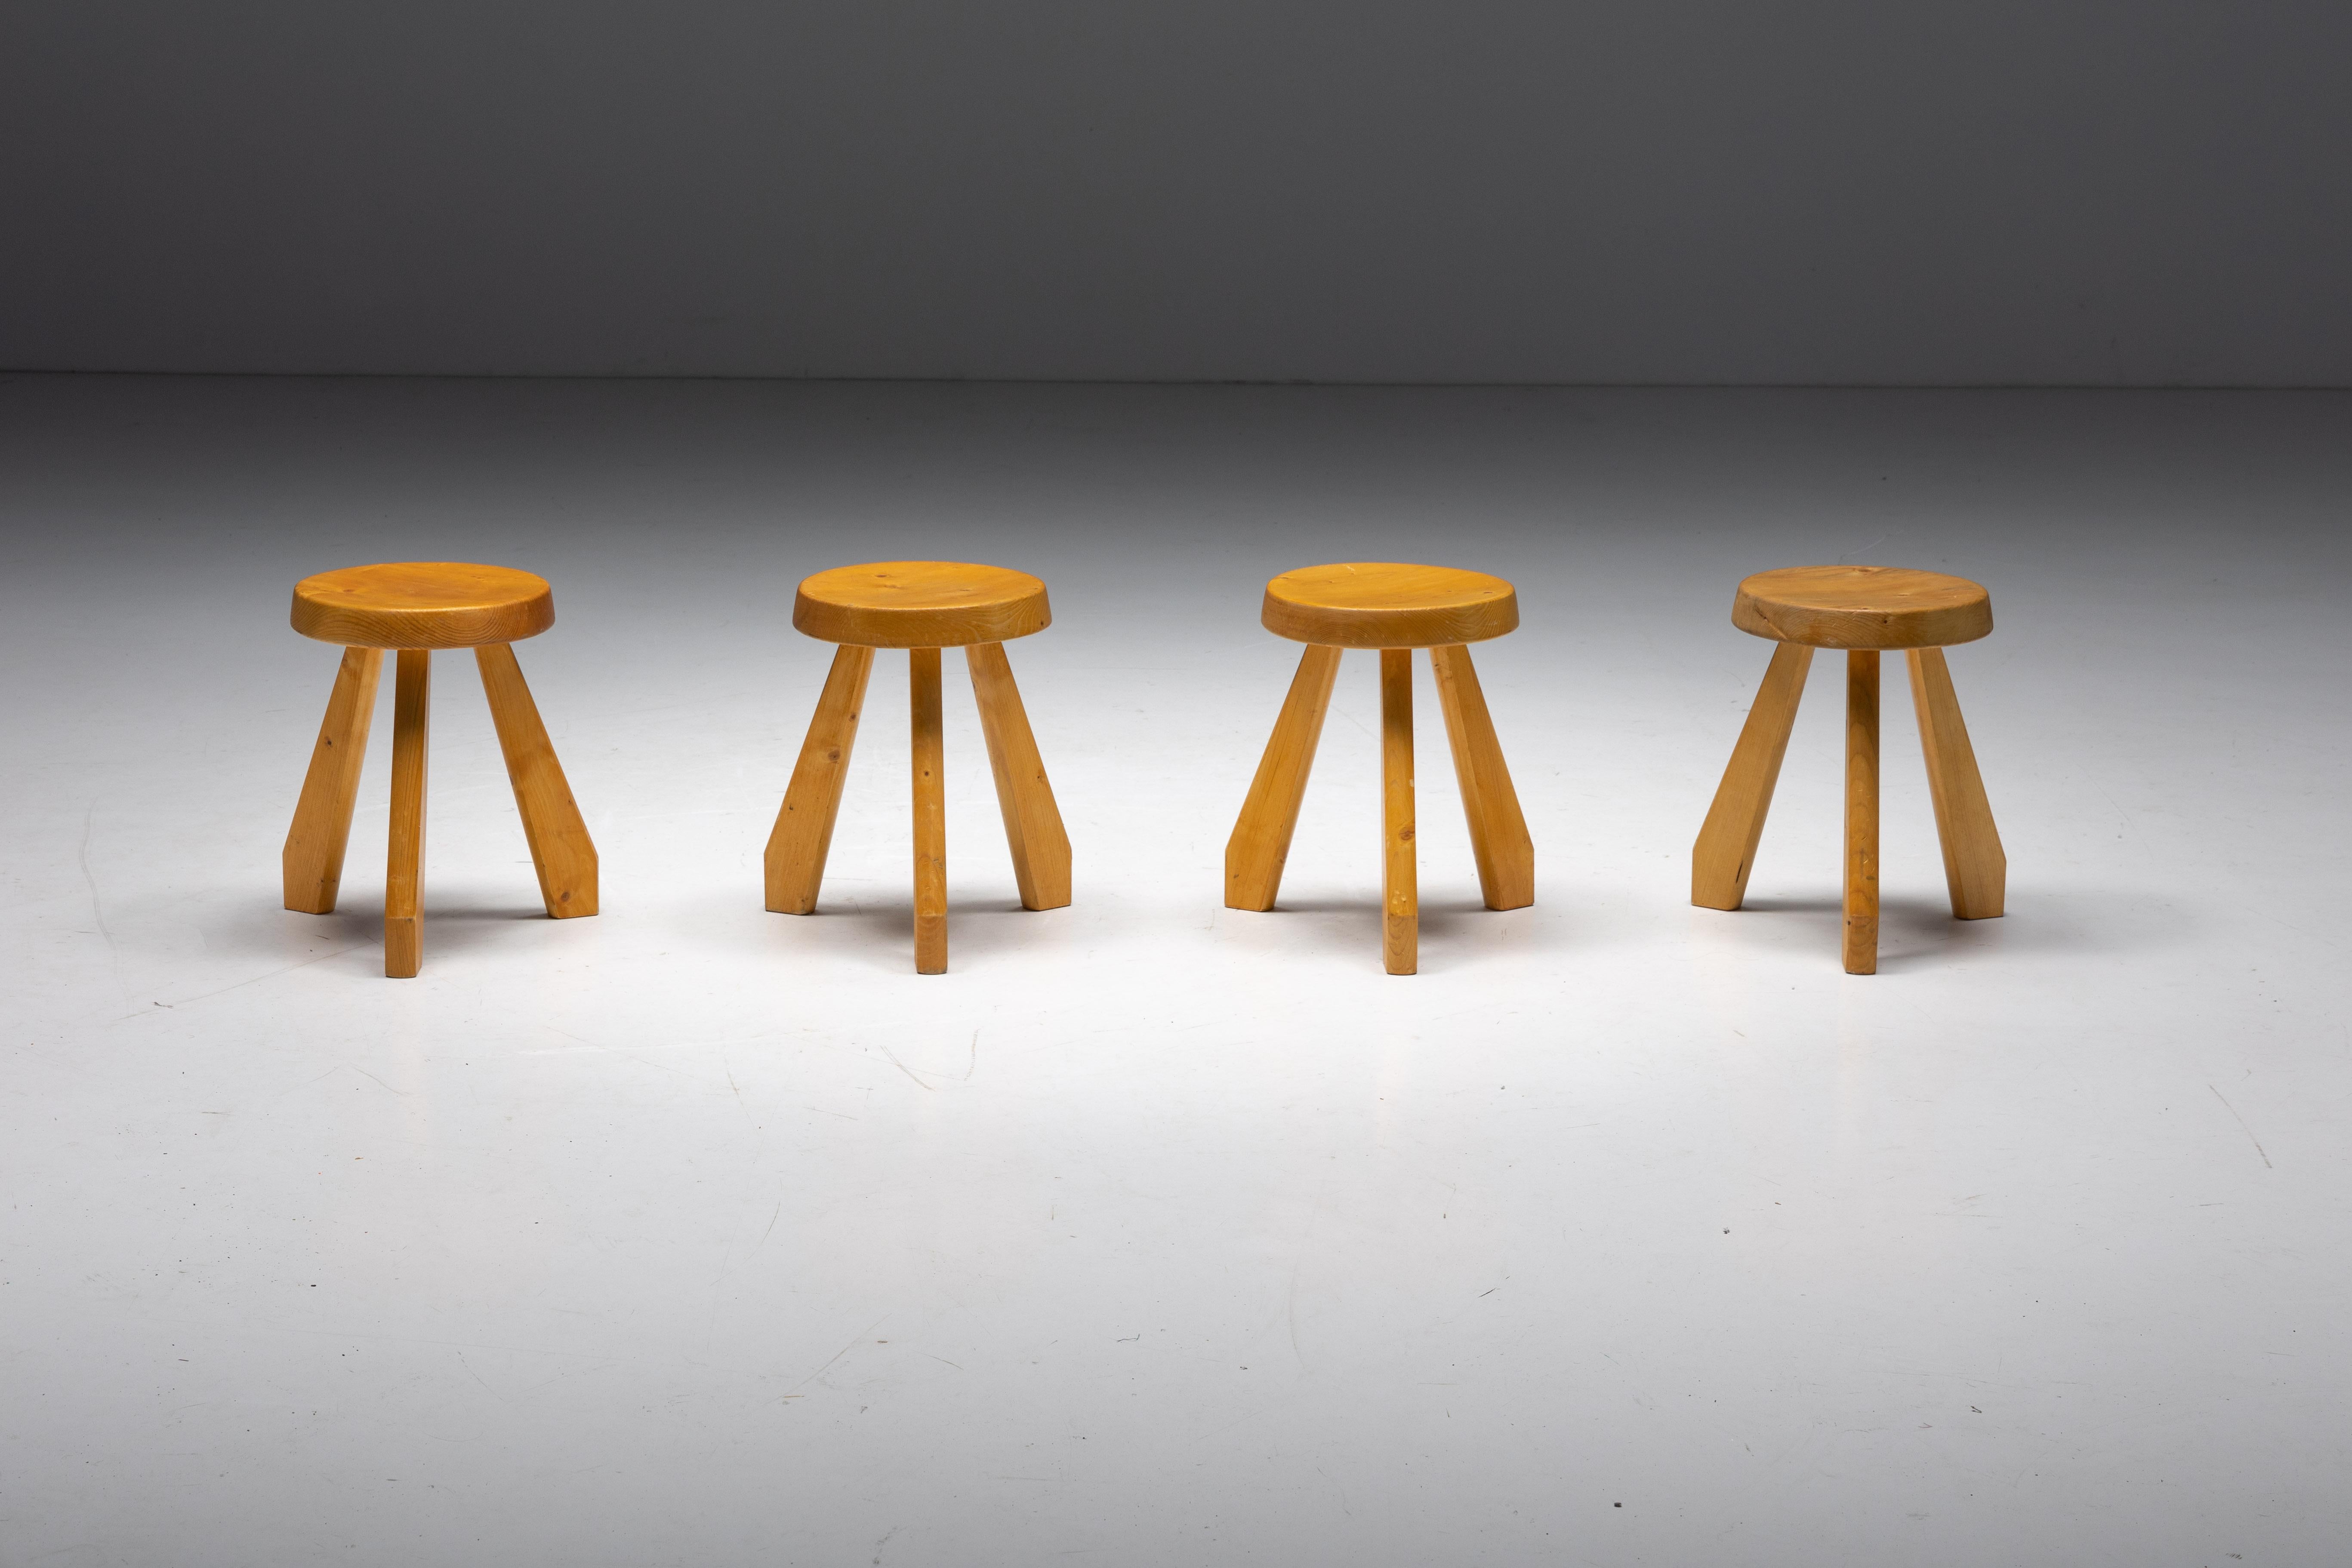 Charlotte Perriand; Mid-Century Modern; 1960s; 1950s; France; Sandoz; Méribel; Stools; Modernist; Pine; France; Les Arcs; Modernist Design;

Sandoz stools by Charlotte Perriand originally designed in 1955 for Perriand's own chalet in Méribel and